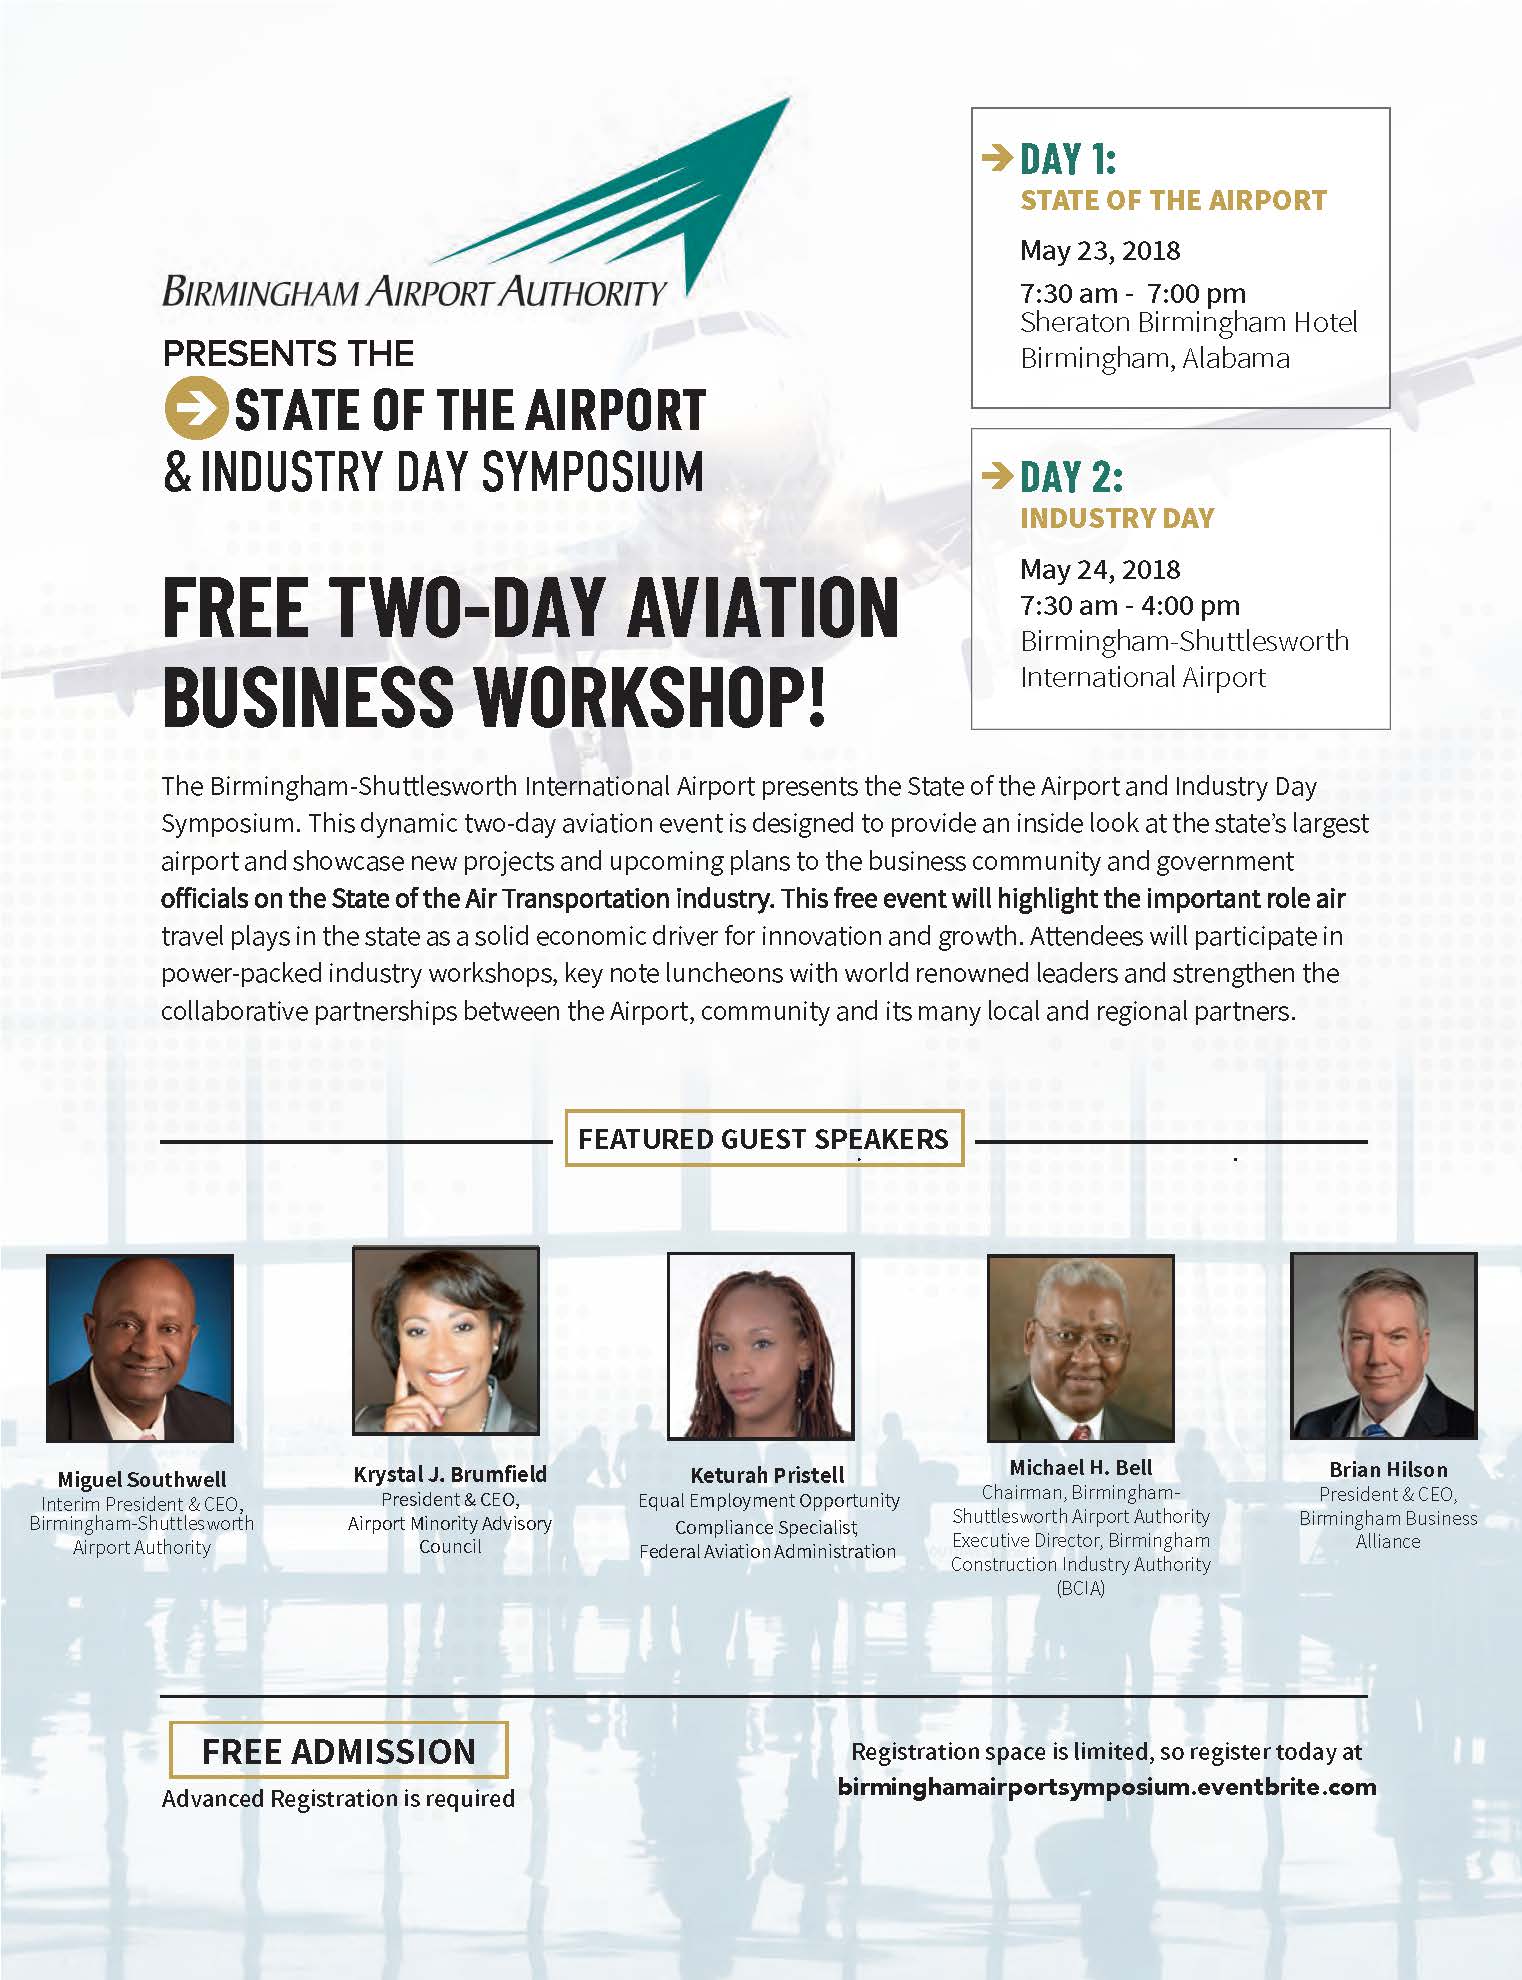 State of the Airport & Industry Day Symposium